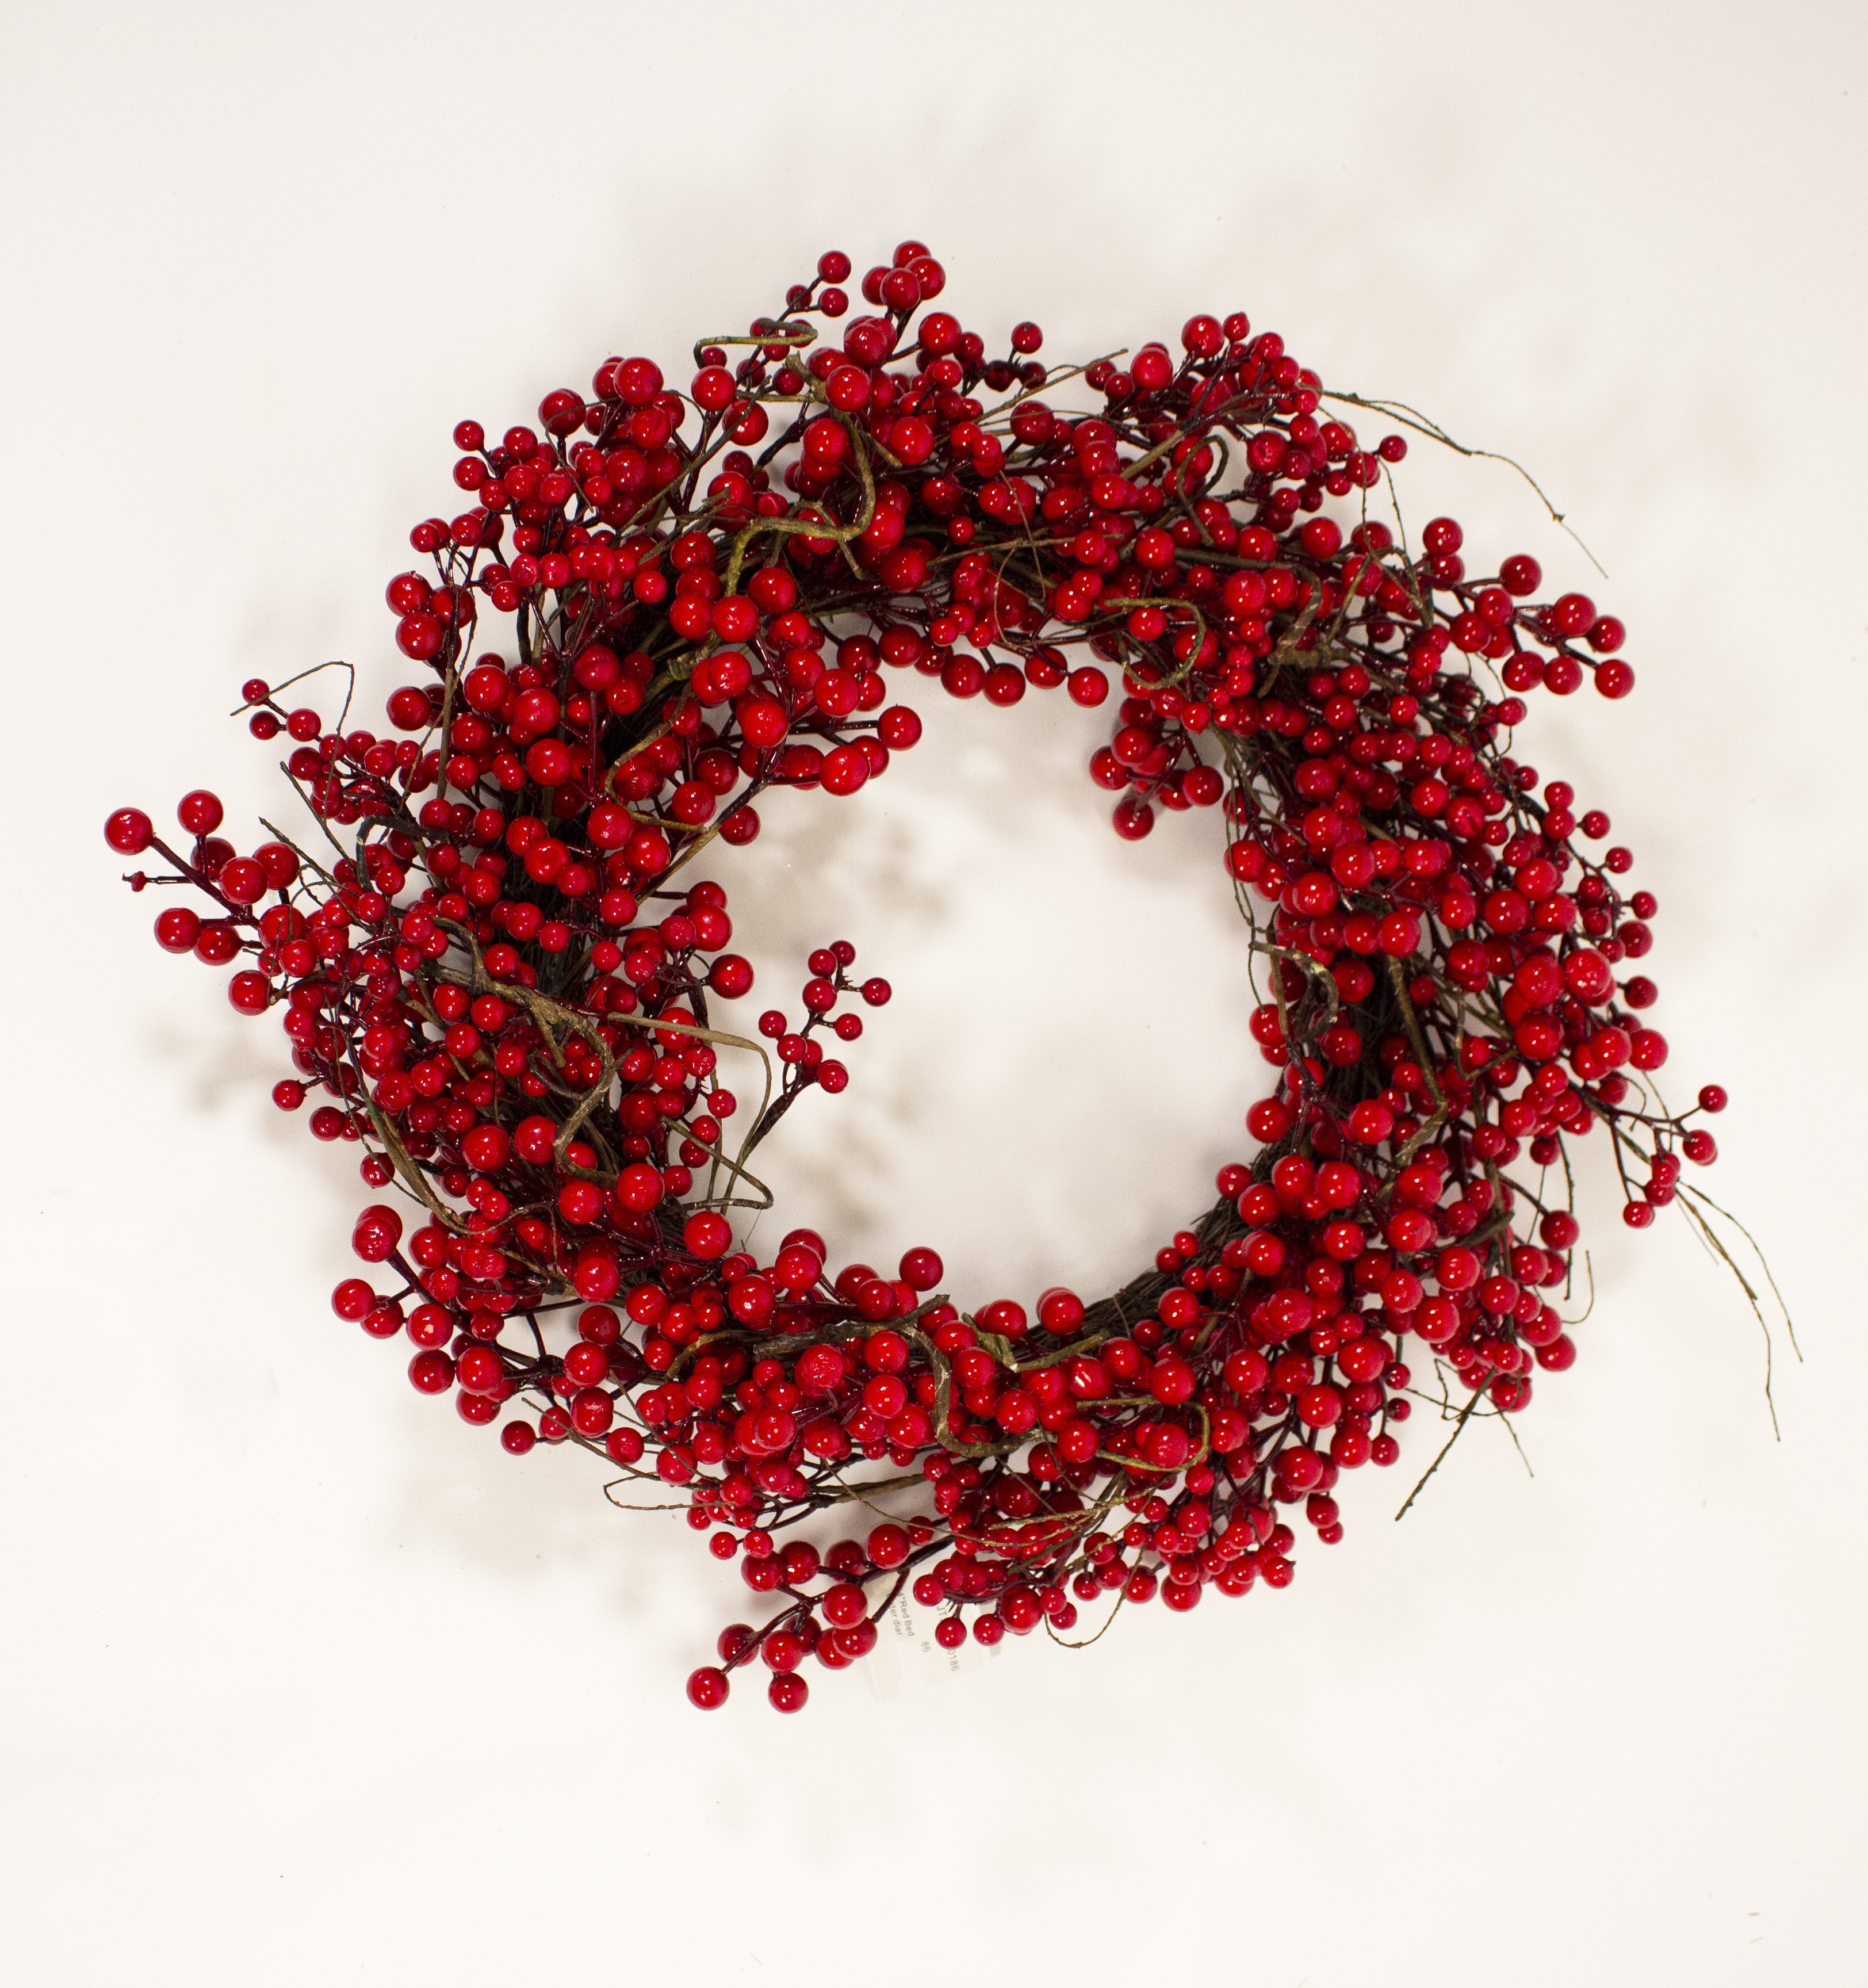 60cm Red Berry Christmas Wreath